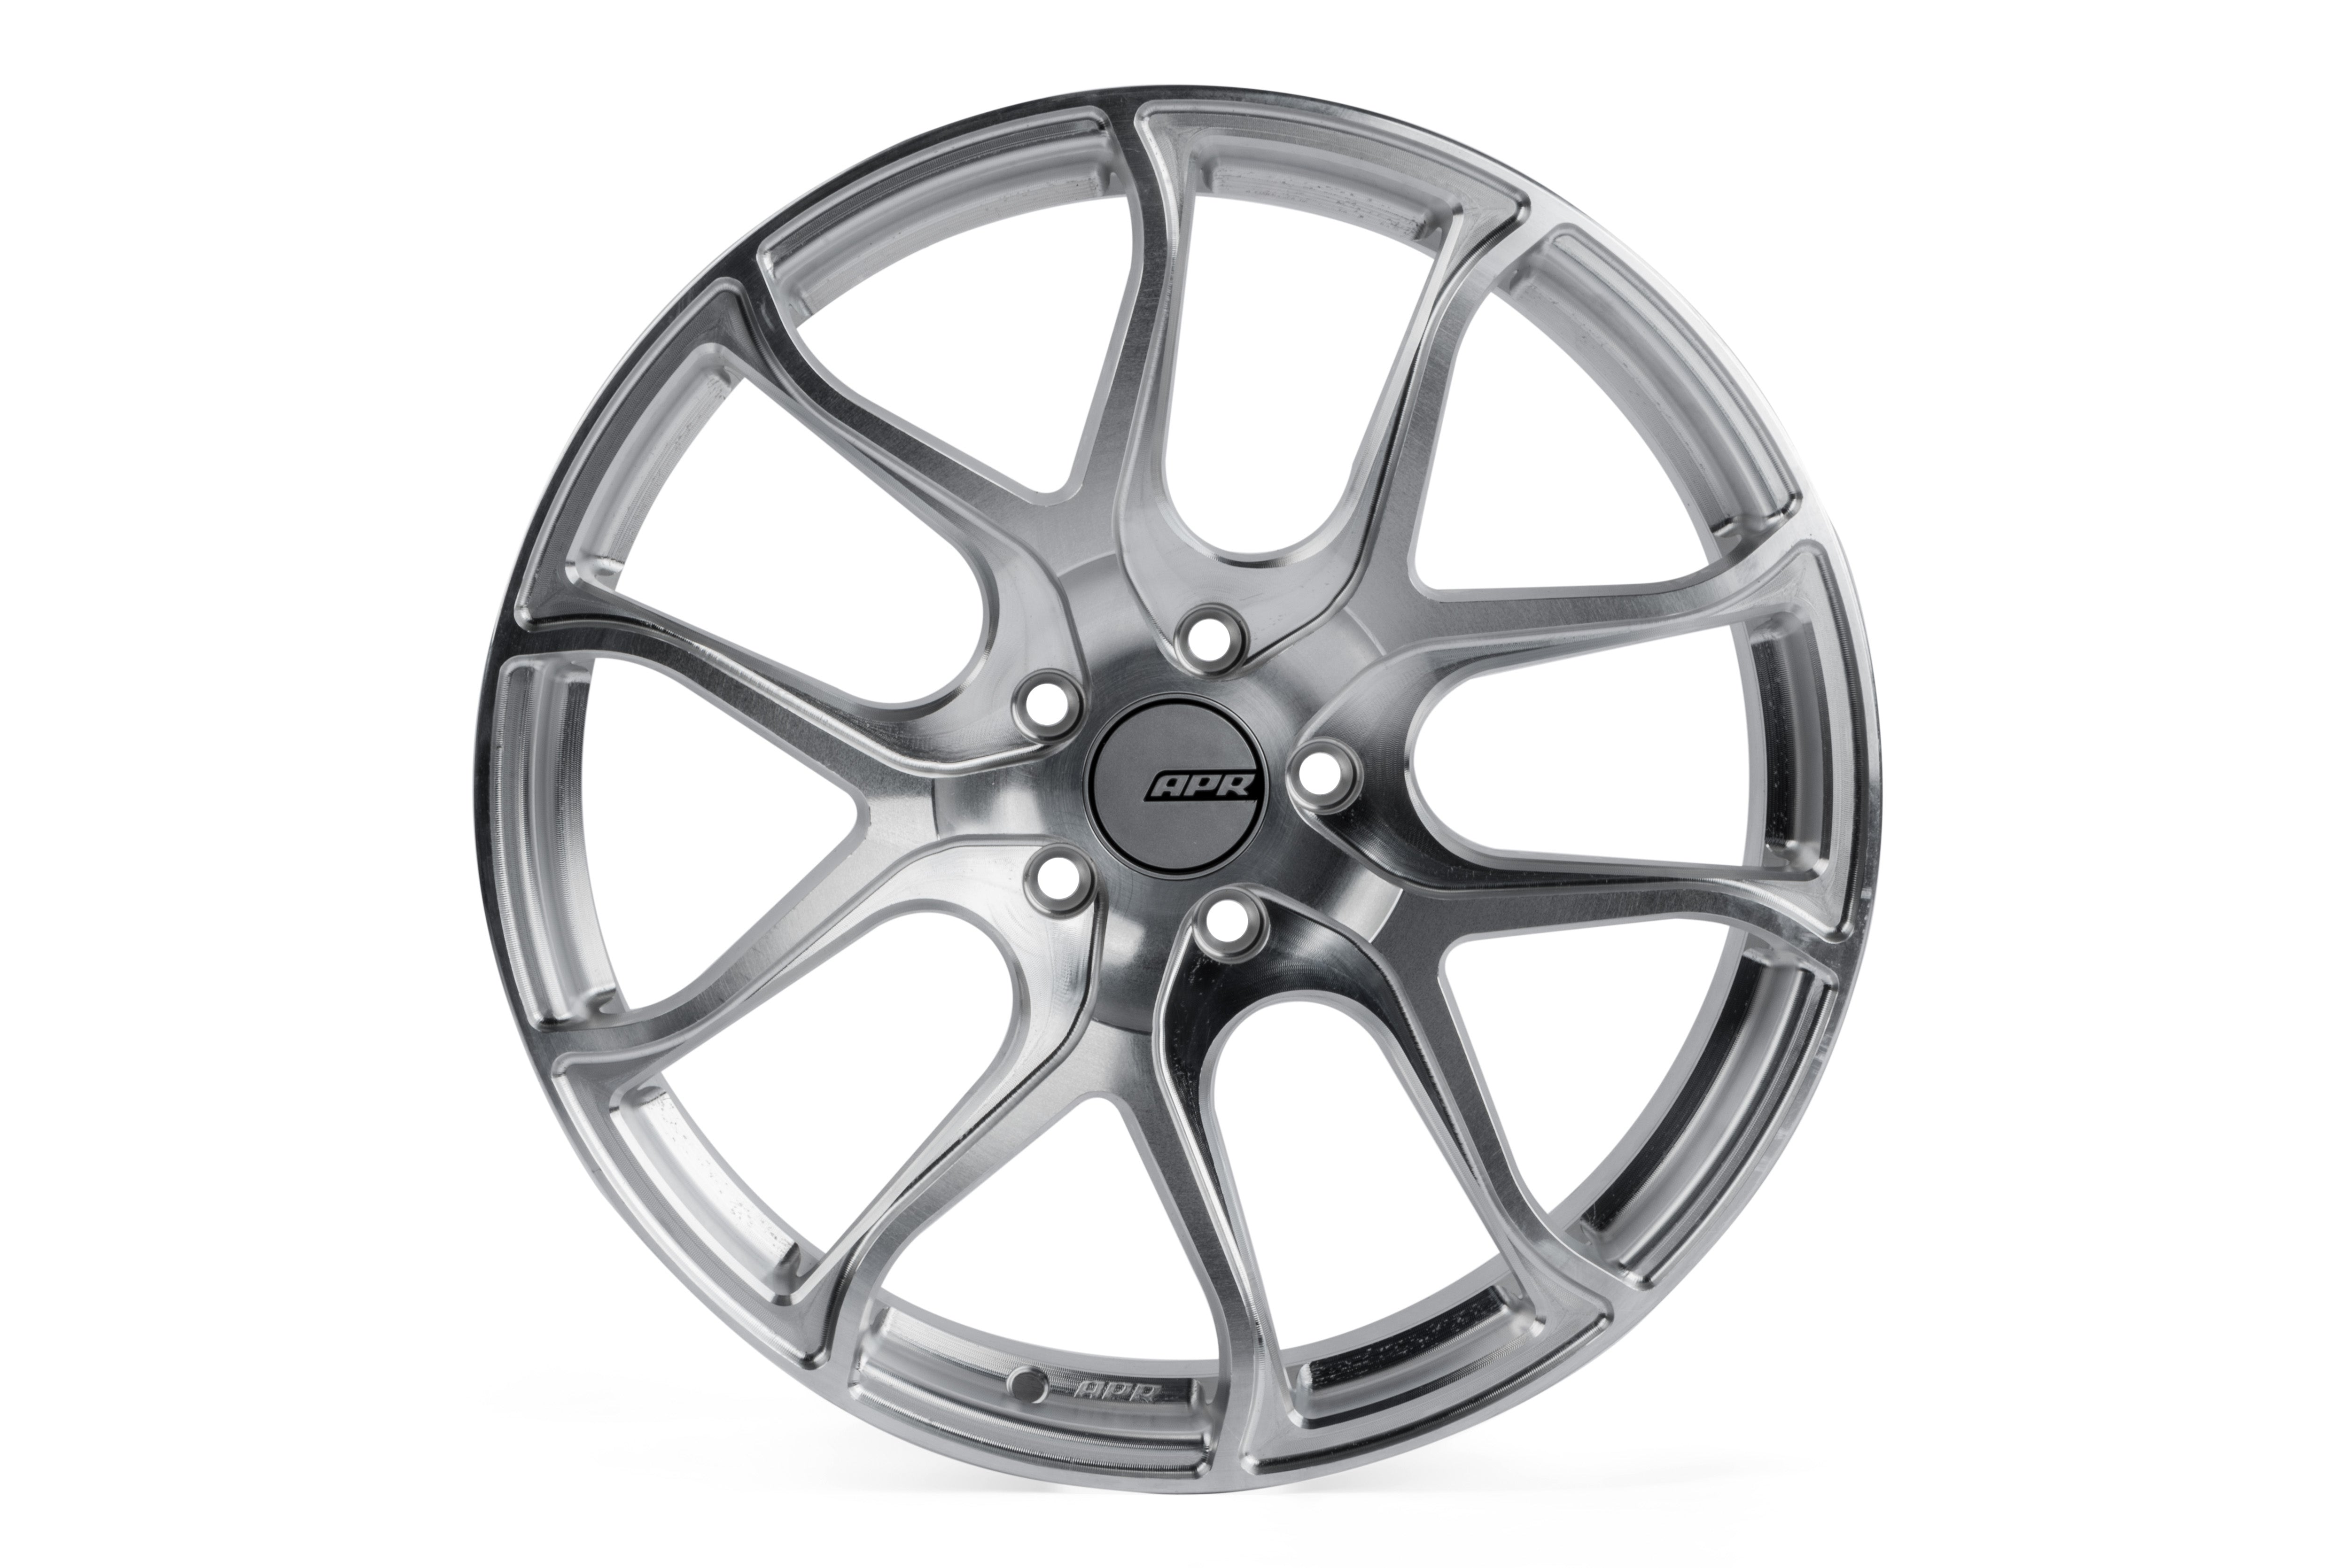 APR S01 FORGED WHEELS (19X8.5) (RAW/UNFINISHED) (1 WHEEL)